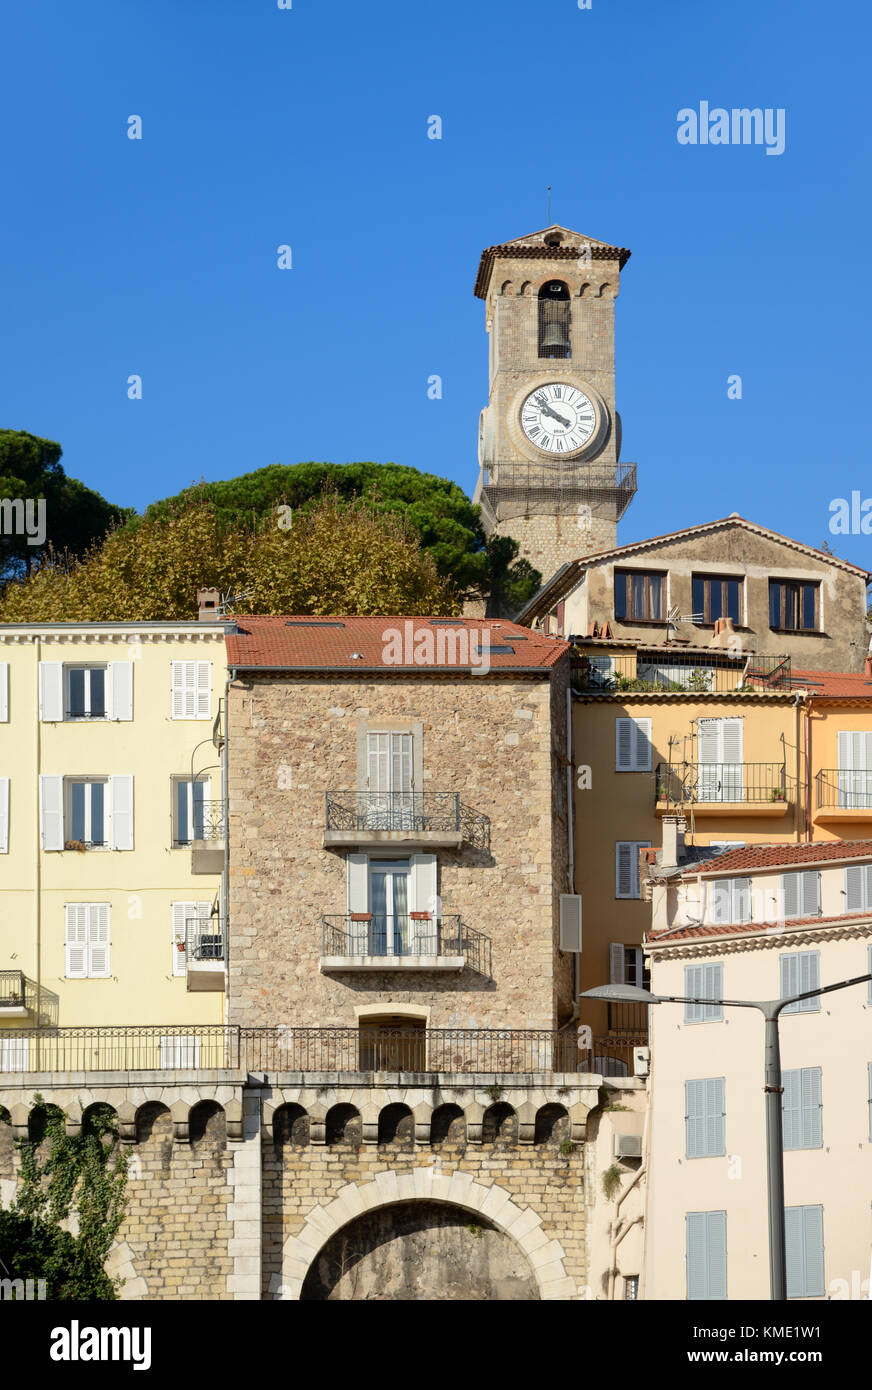 View of Le Suquet Old Town, and Belfry or Clock Tower of the Church Notre-Dame d'Esperance, Cannes, France Stock Photo